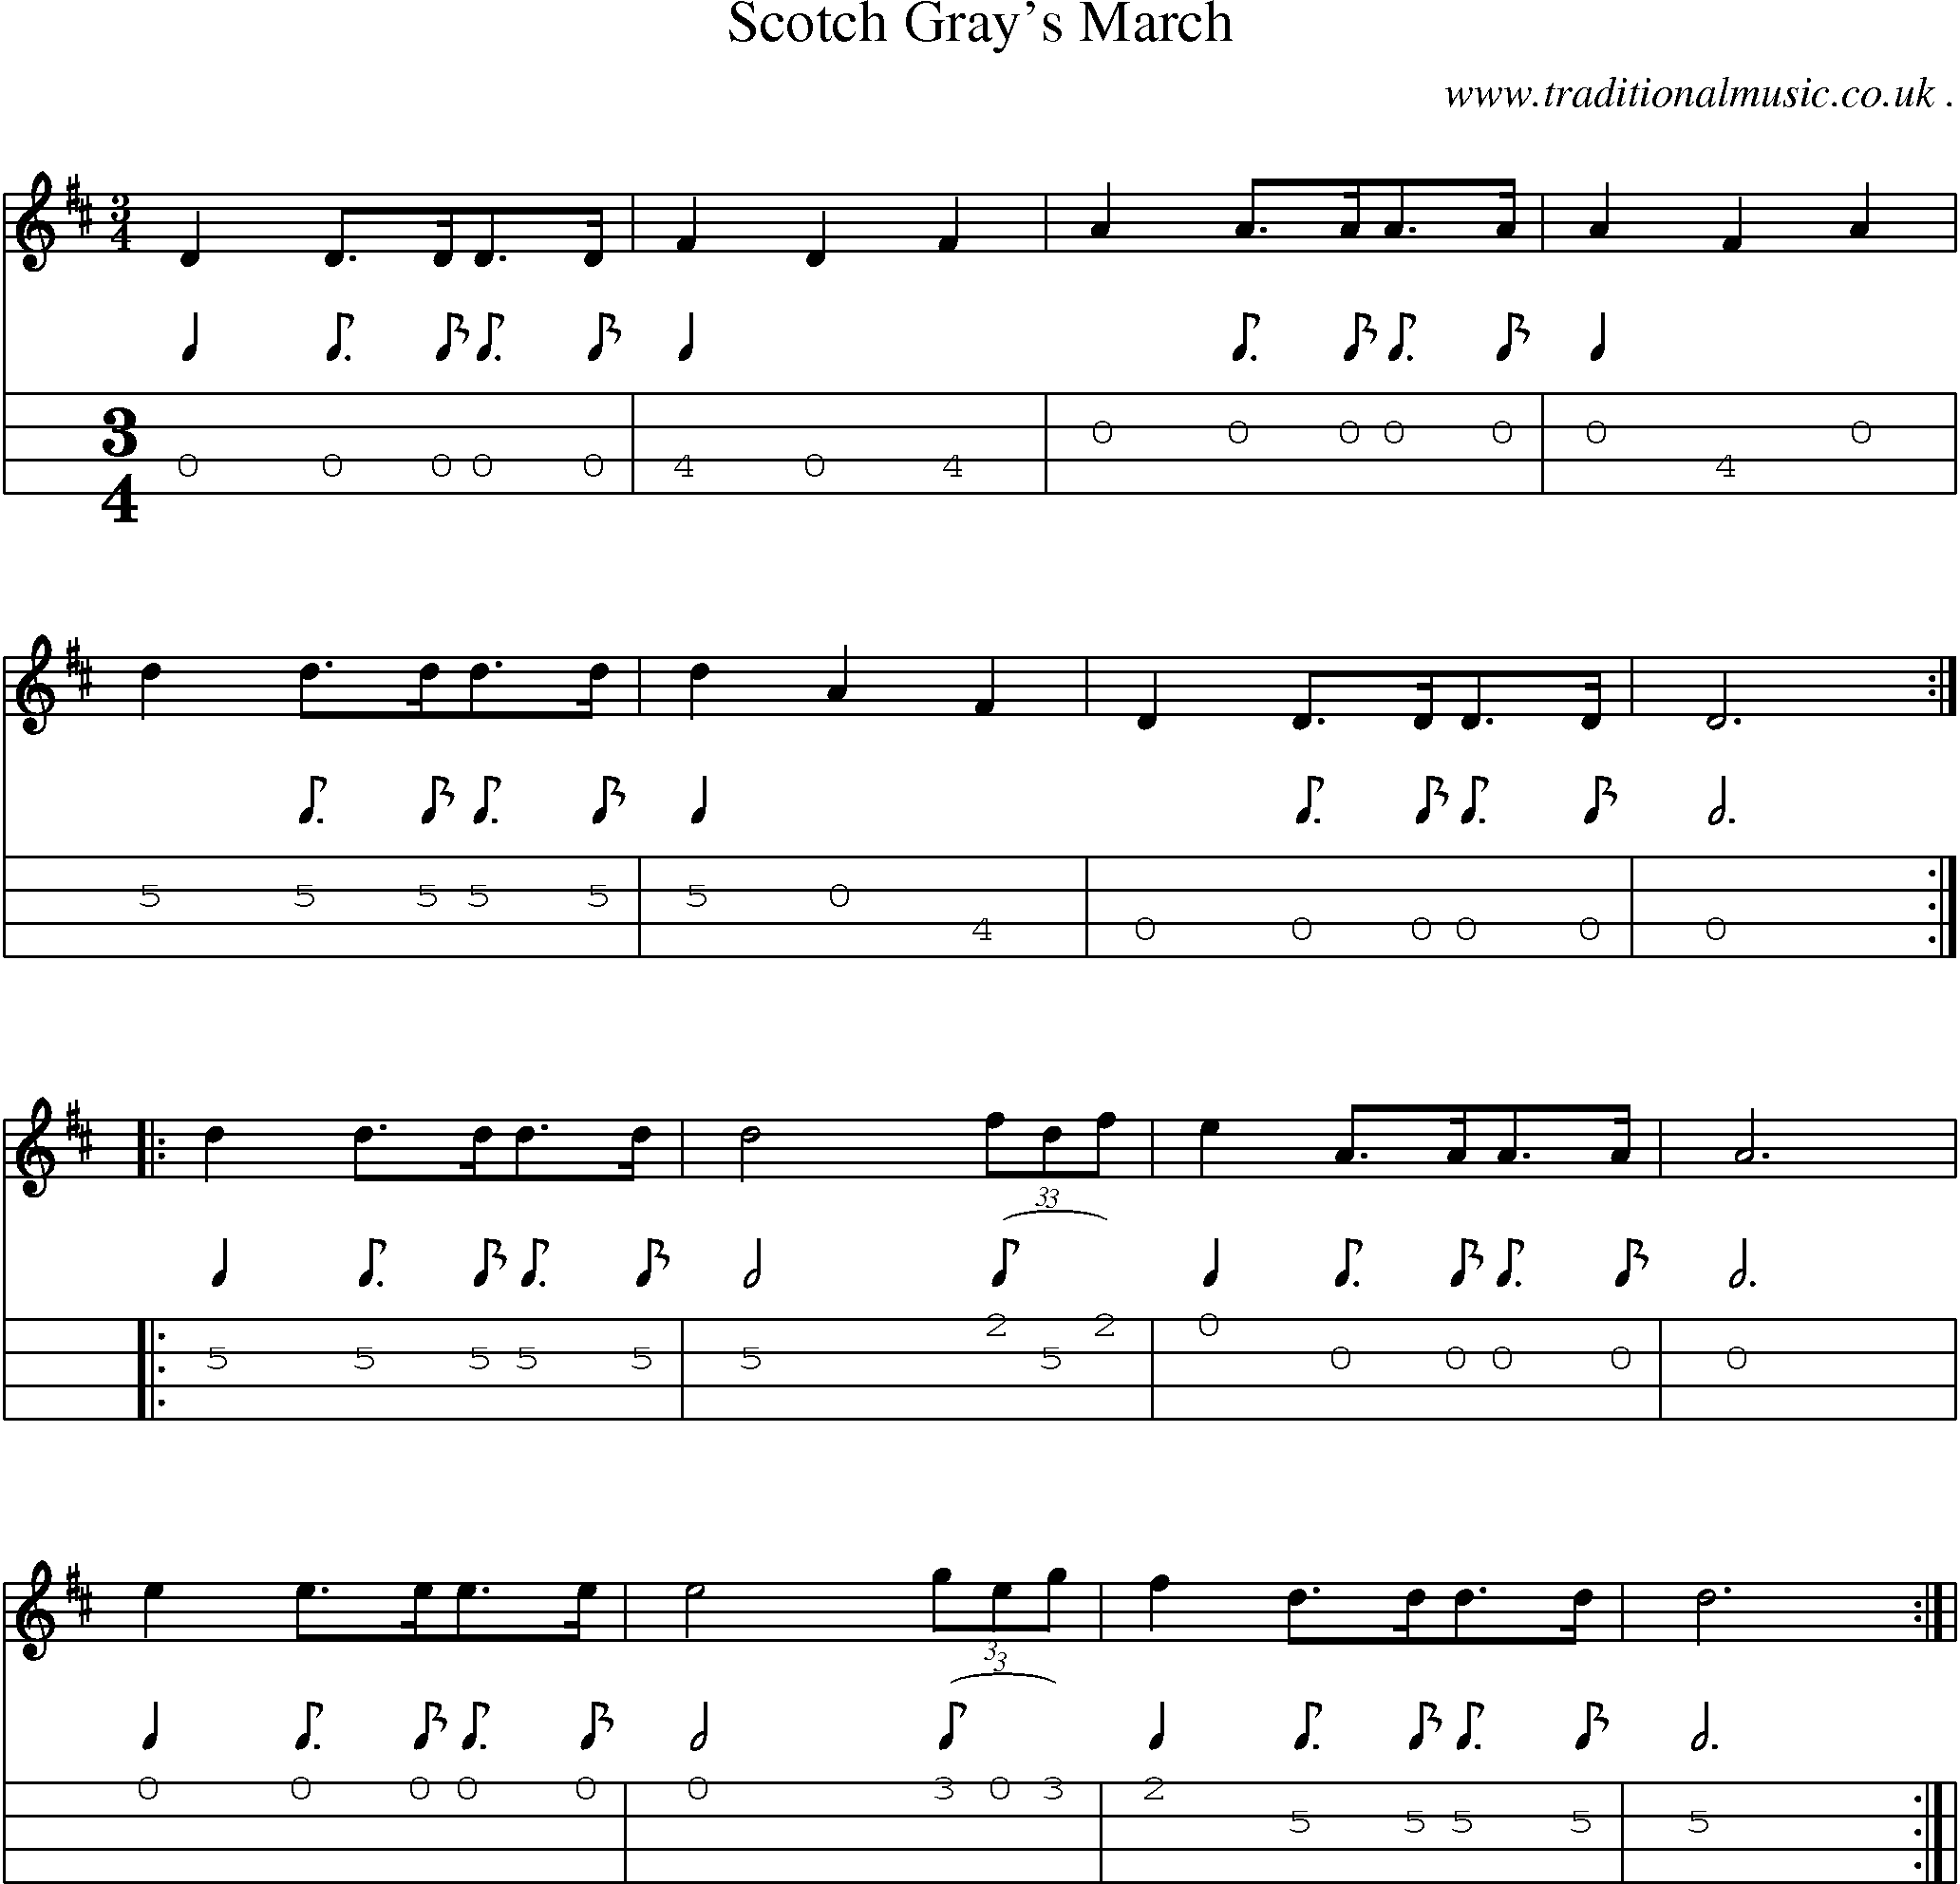 Sheet-Music and Mandolin Tabs for Scotch Grays March